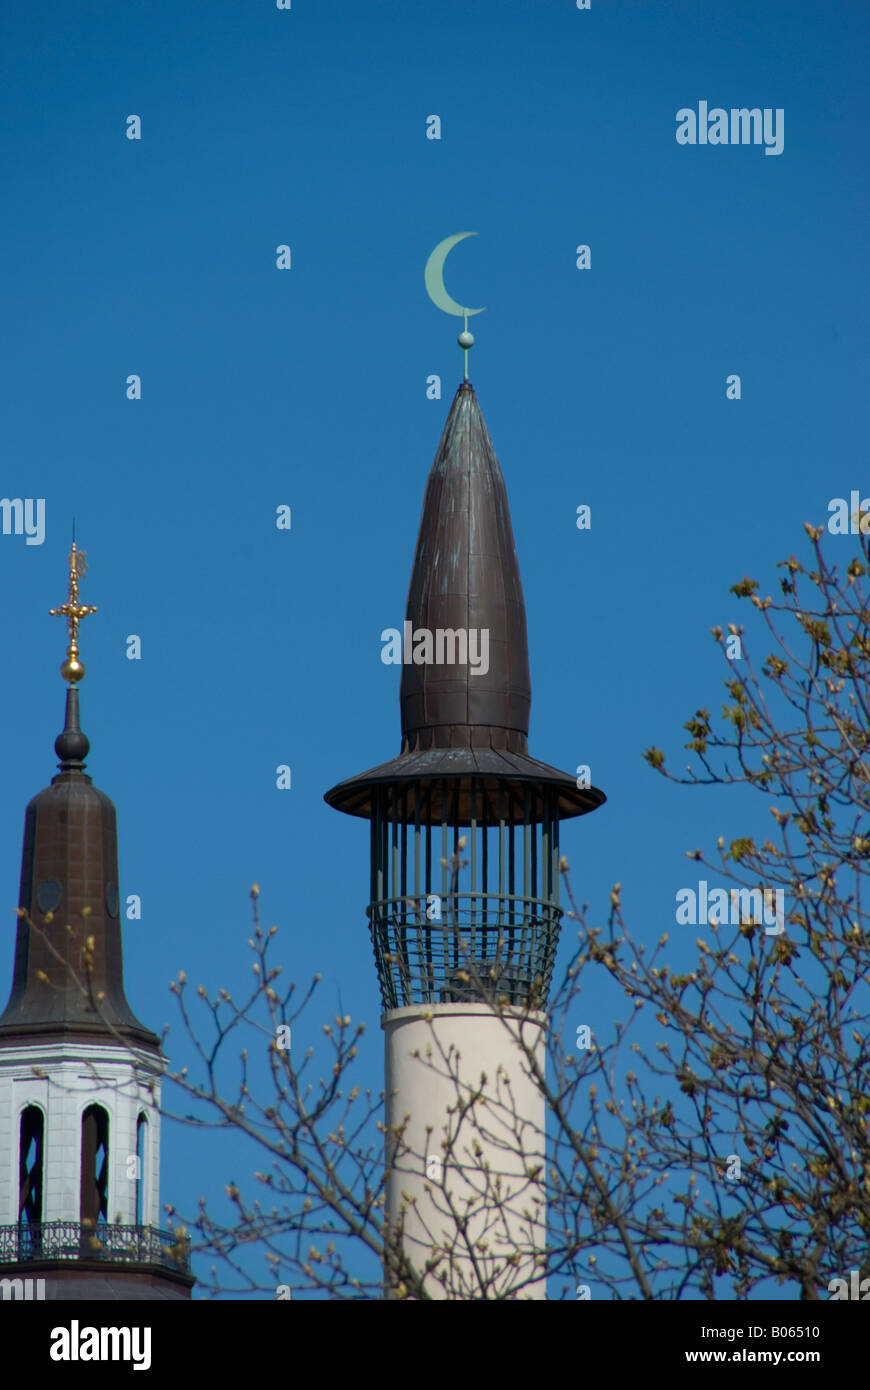 Islamic symbol, crescent moon on top of a minaret in a mosque in stockholm Stock Photo